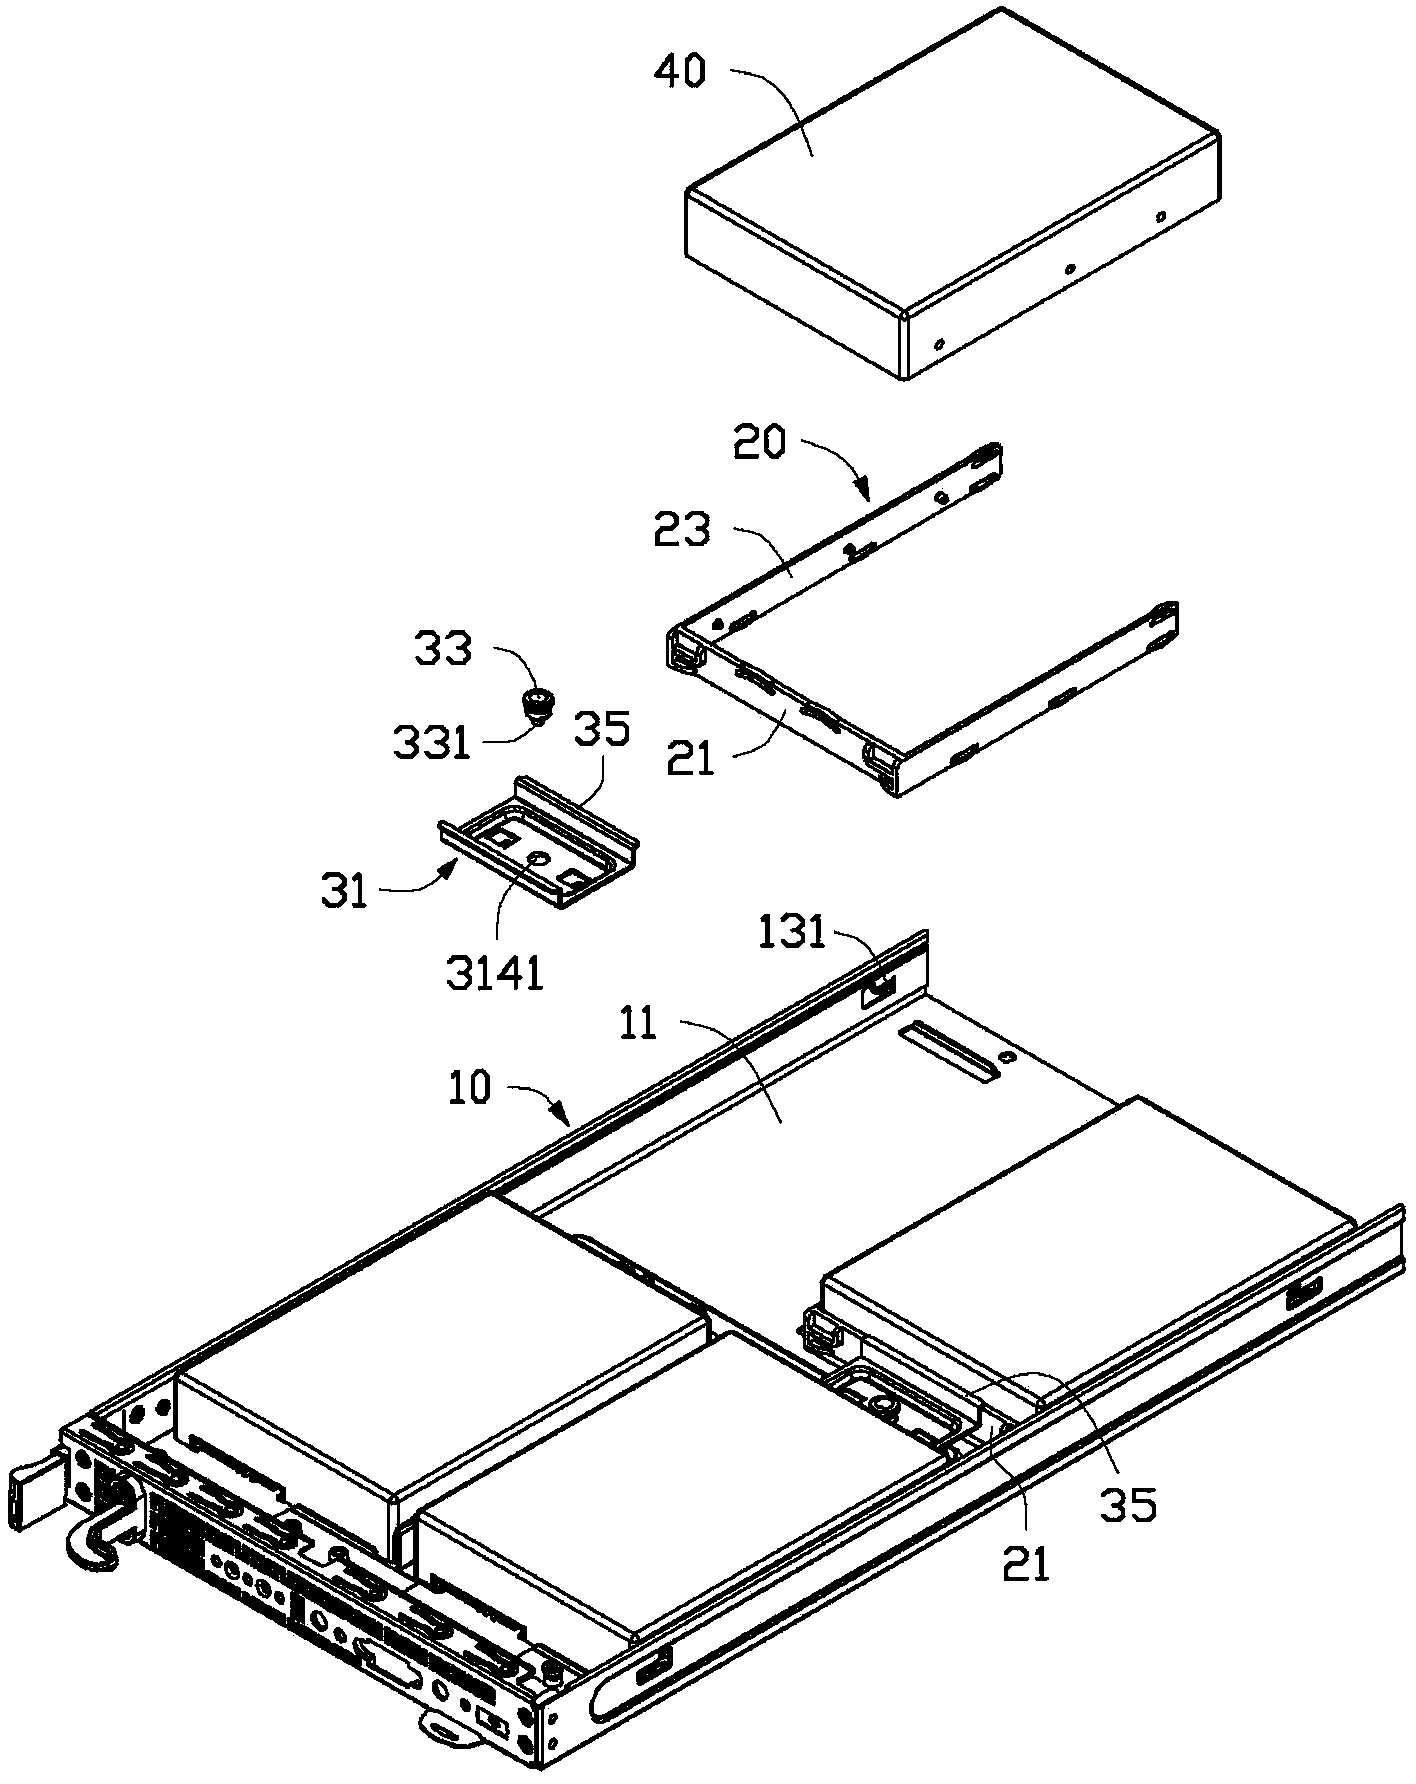 Storer fixing device